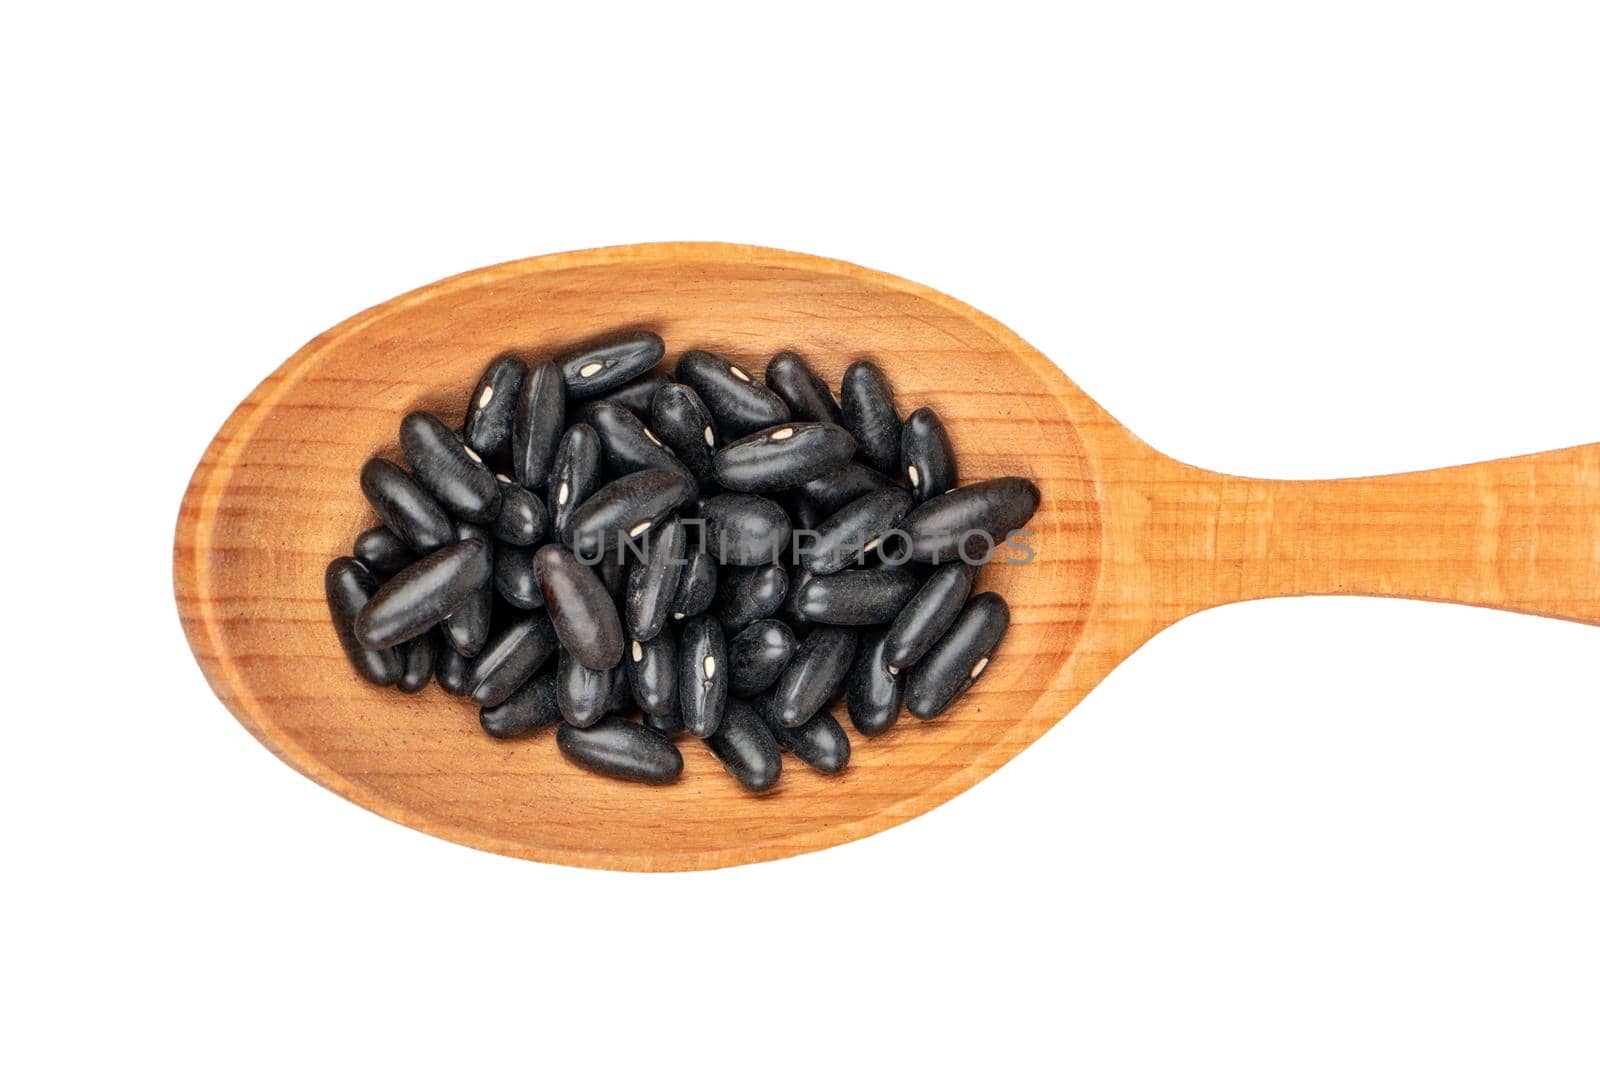 Black beans in spoon by andregric